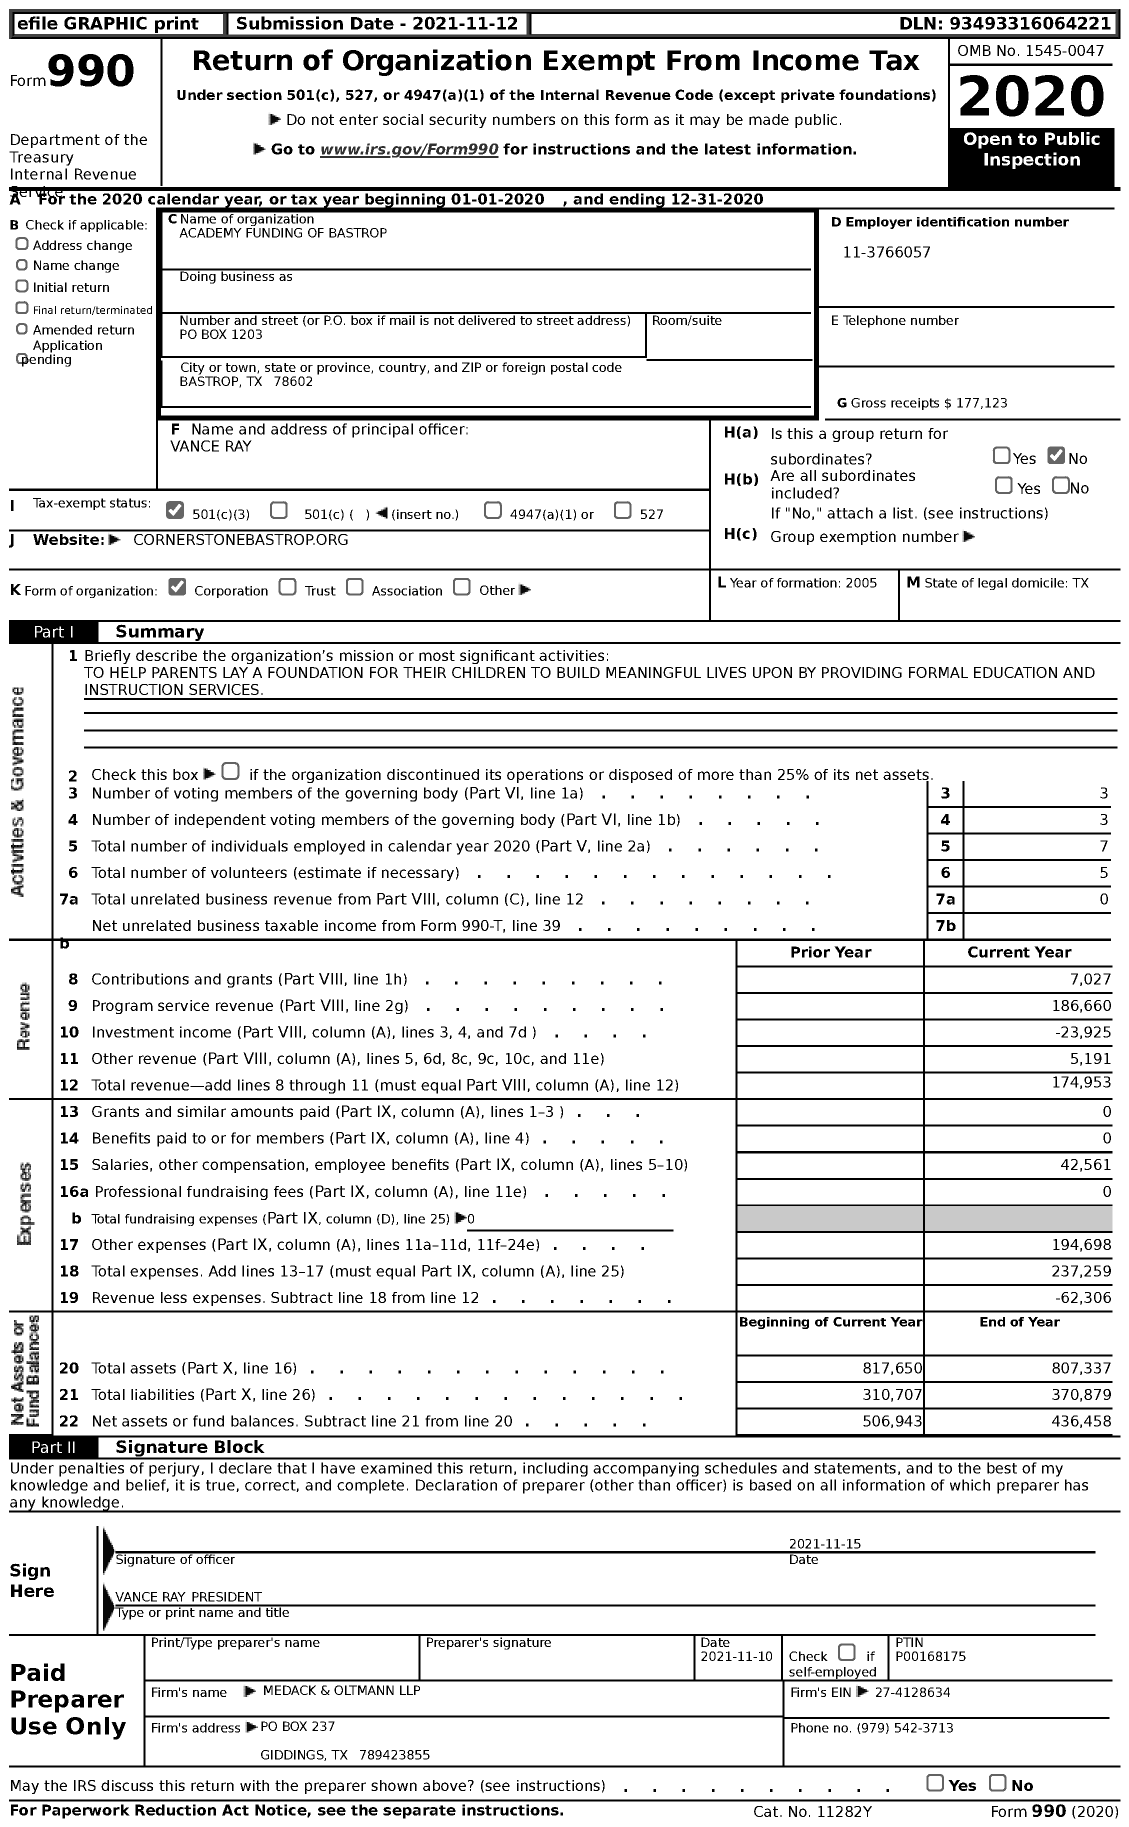 Image of first page of 2020 Form 990 for Academy Funding of Bastrop (AFB)